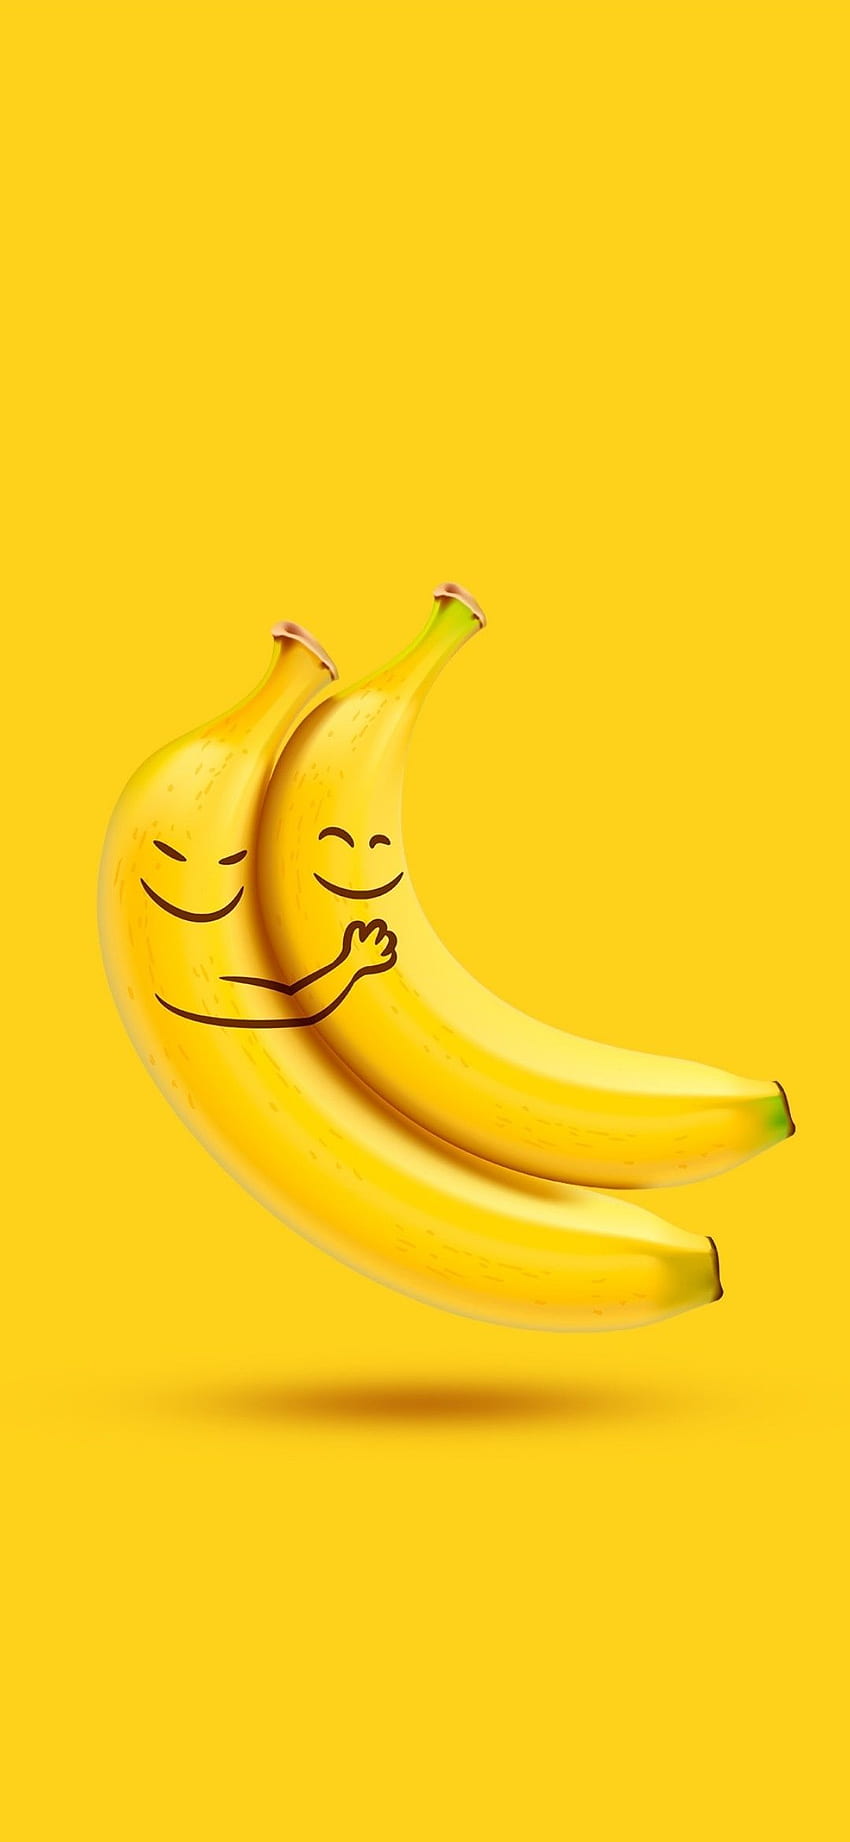 27 Banana Pictures  Download Free Images on Unsplash